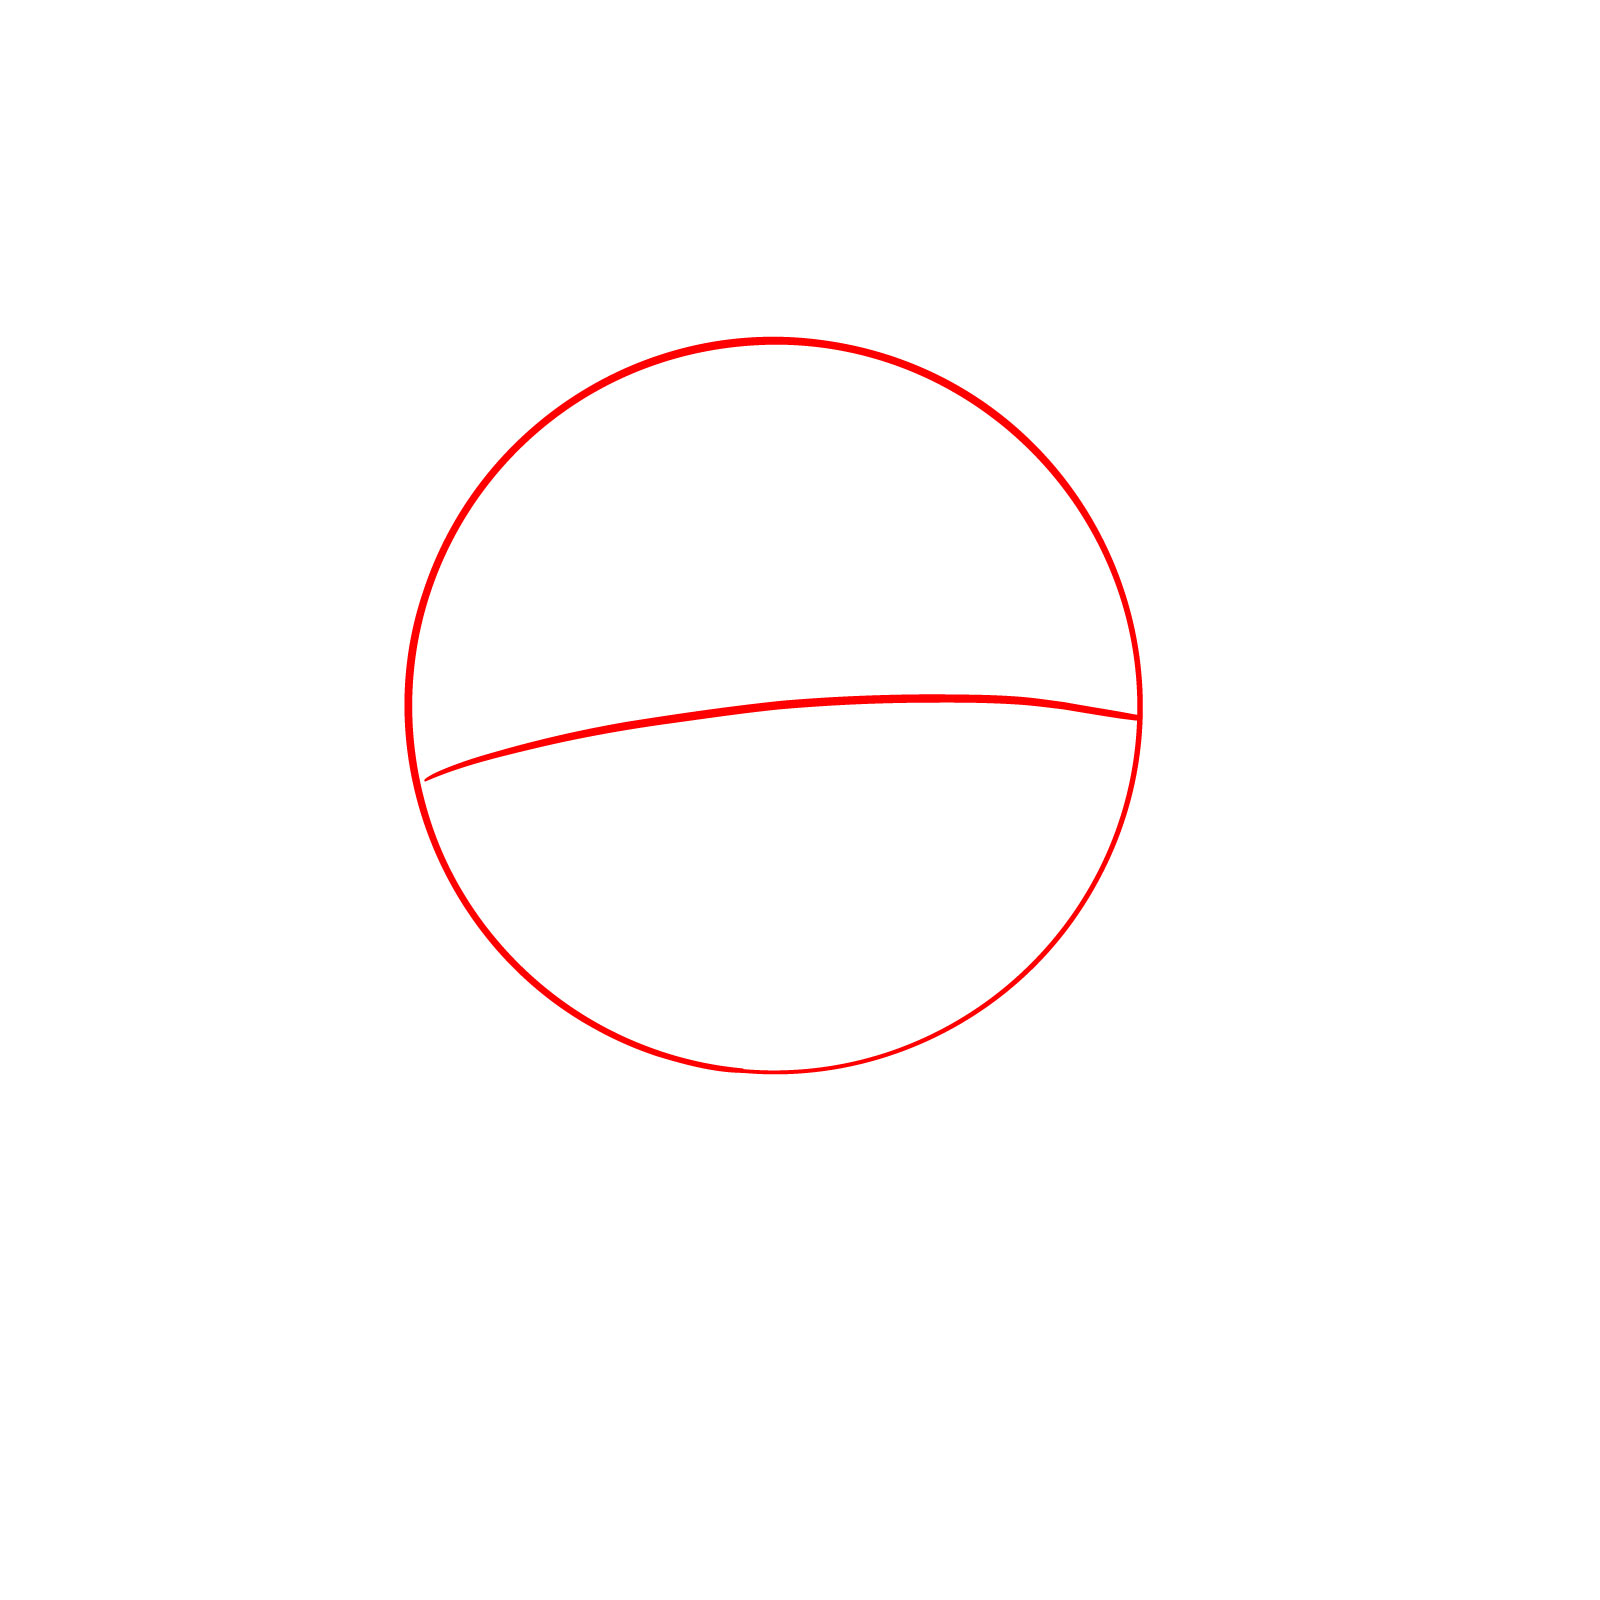 Step-by-step guide on drawing Levi's face showing a circle and a horizontal line - step 01